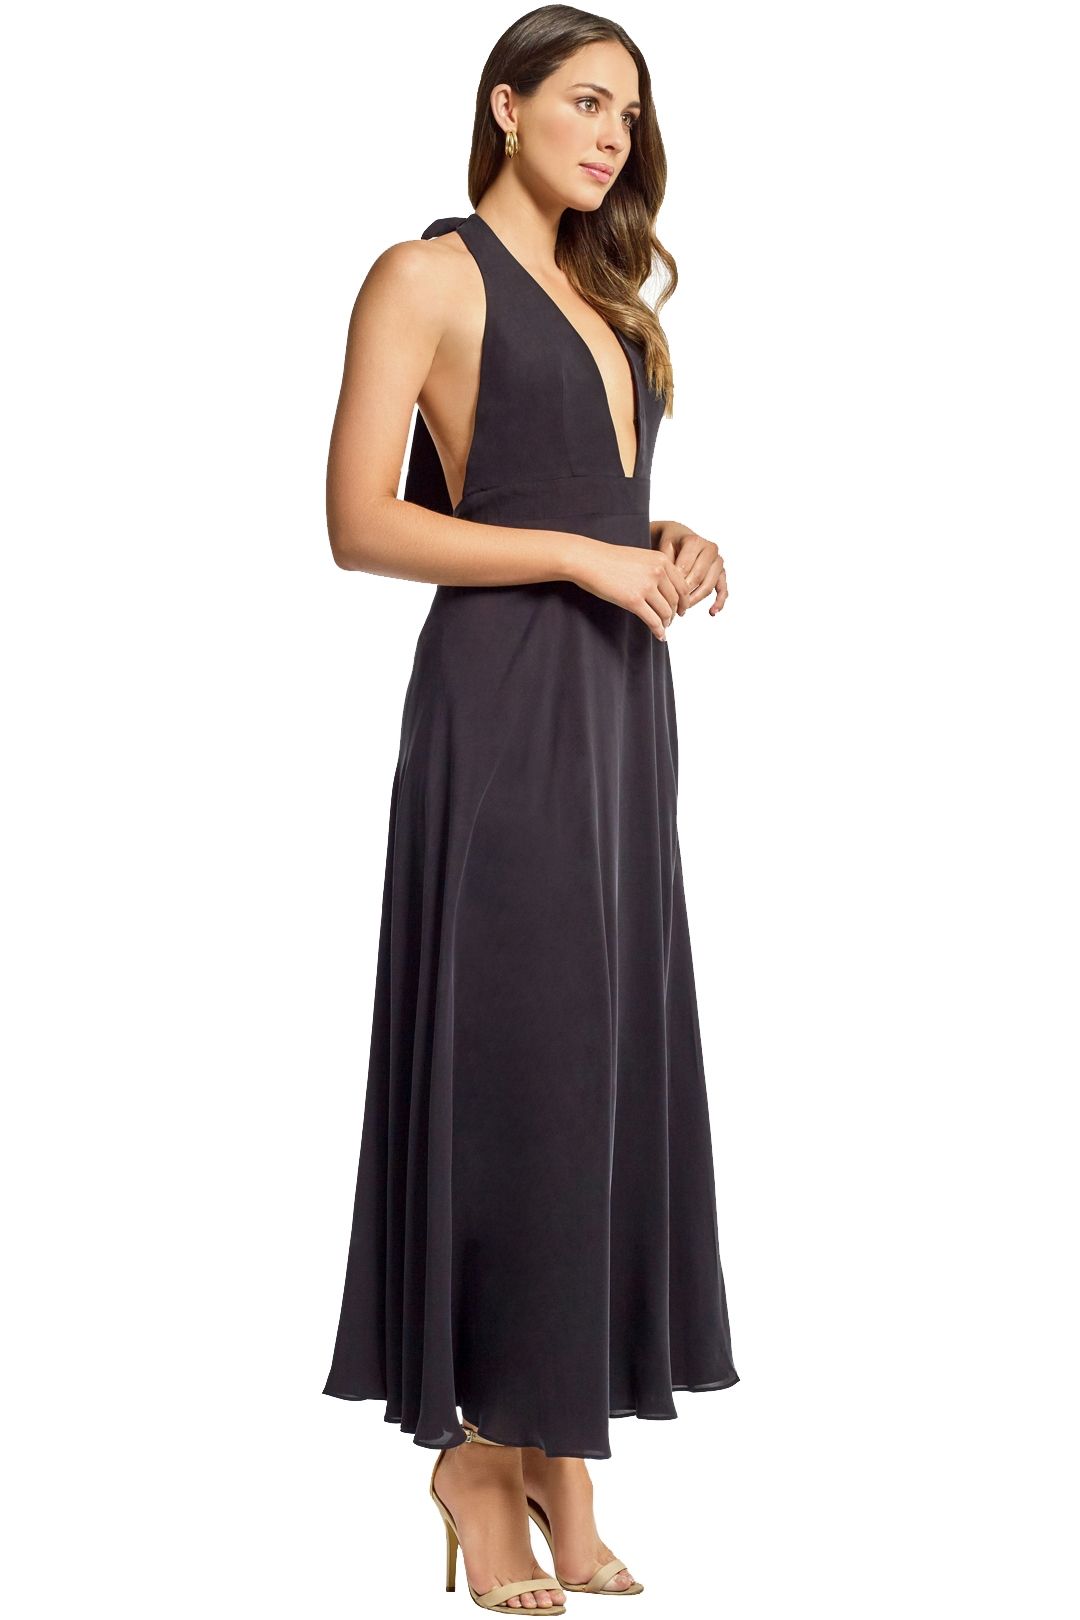 Milly - Charlie Gown - Black - Side